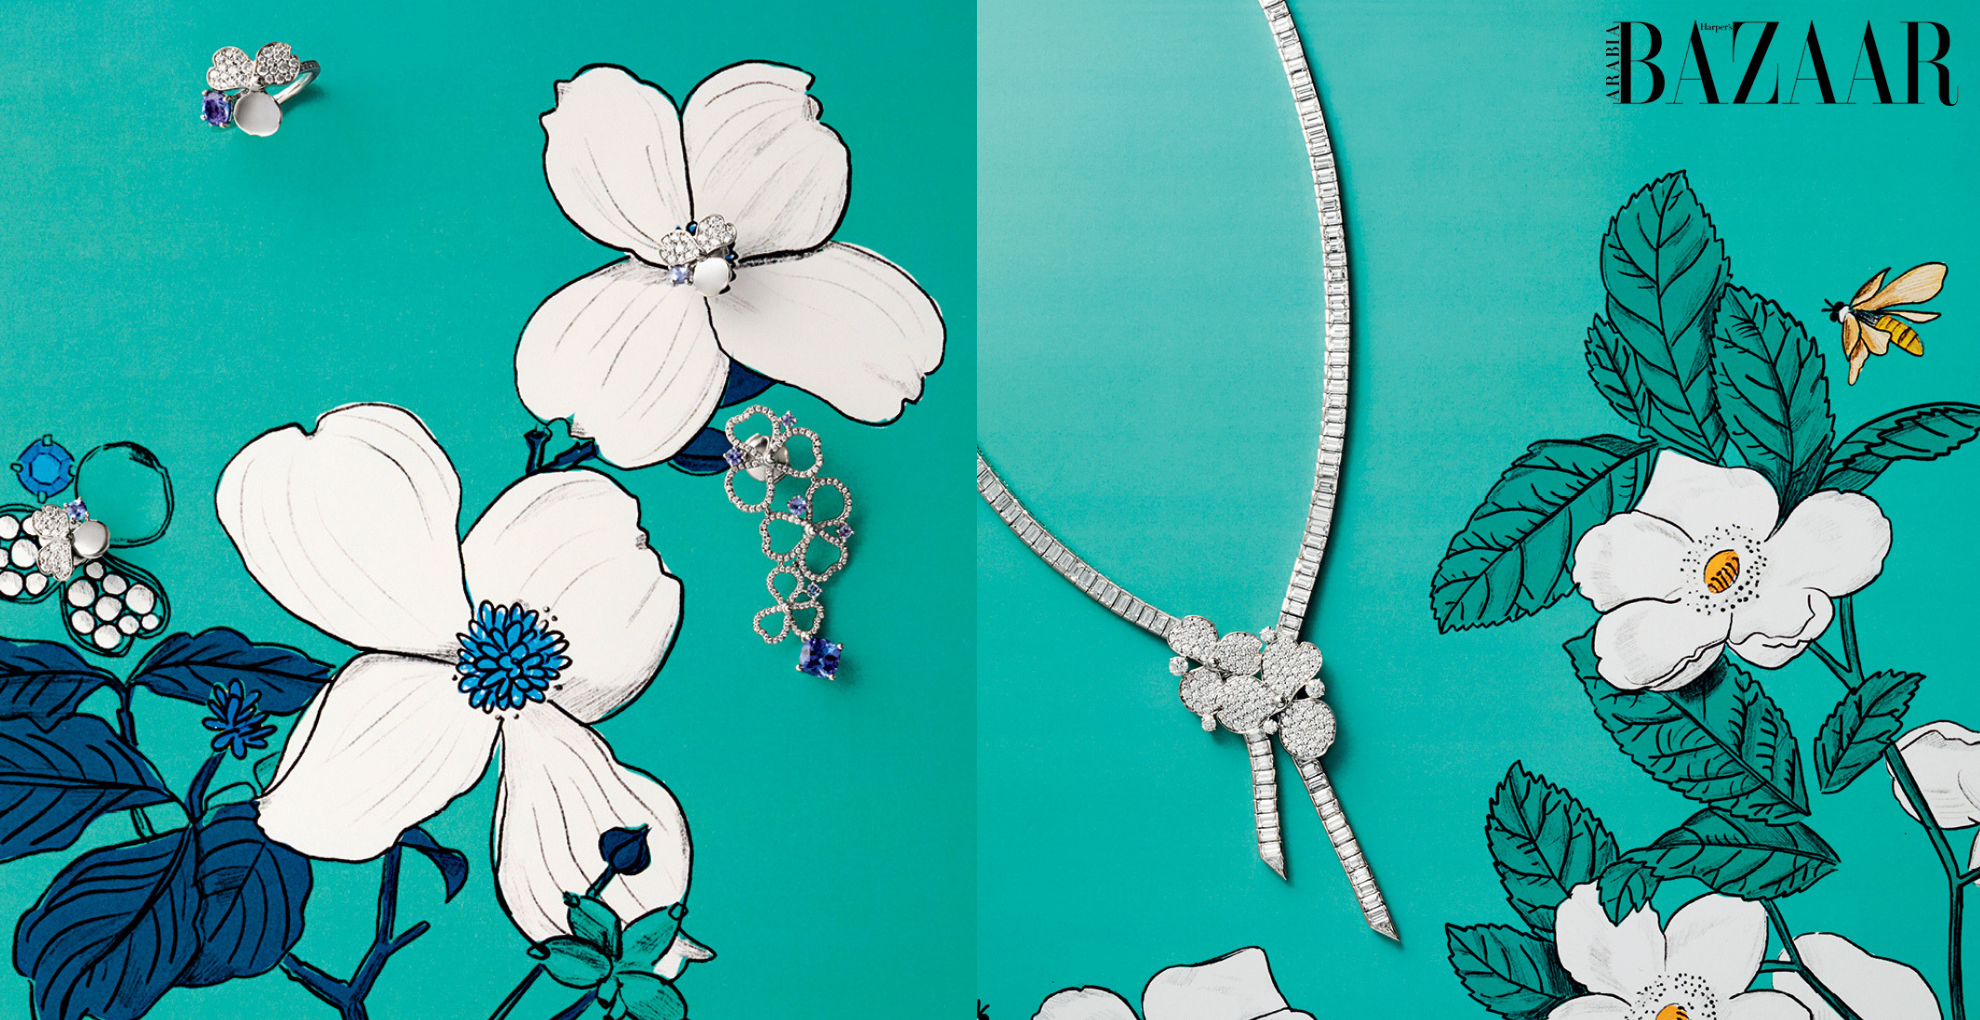 Tiffany & Co. on a new direction with Reed Krakoff, Paper Flowers